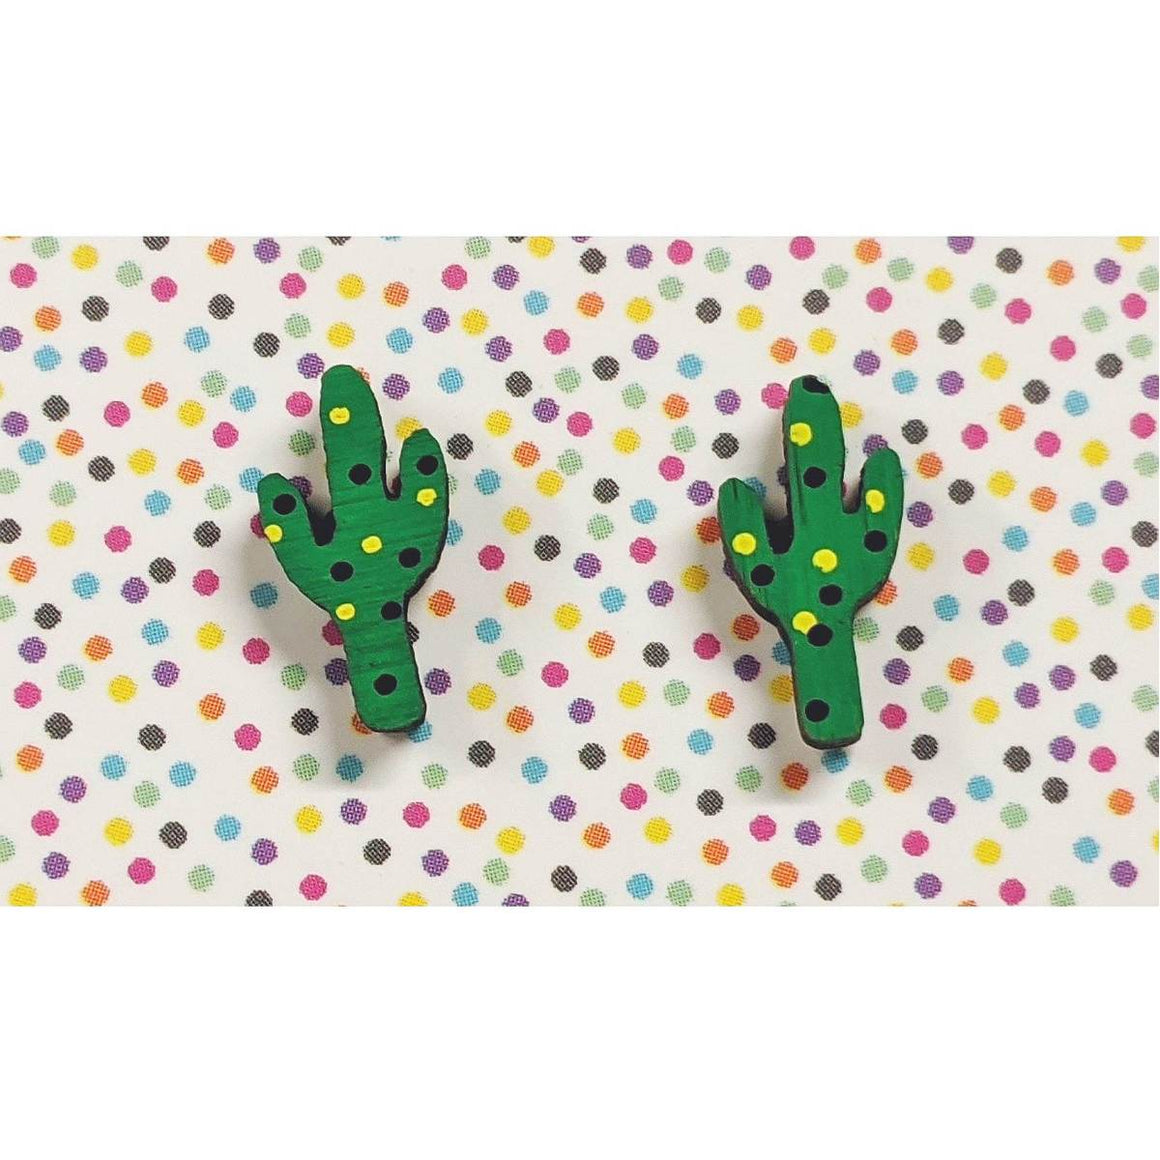 A pair of intricately hand coloured studs depicting green cactuses with black and yellow dots.